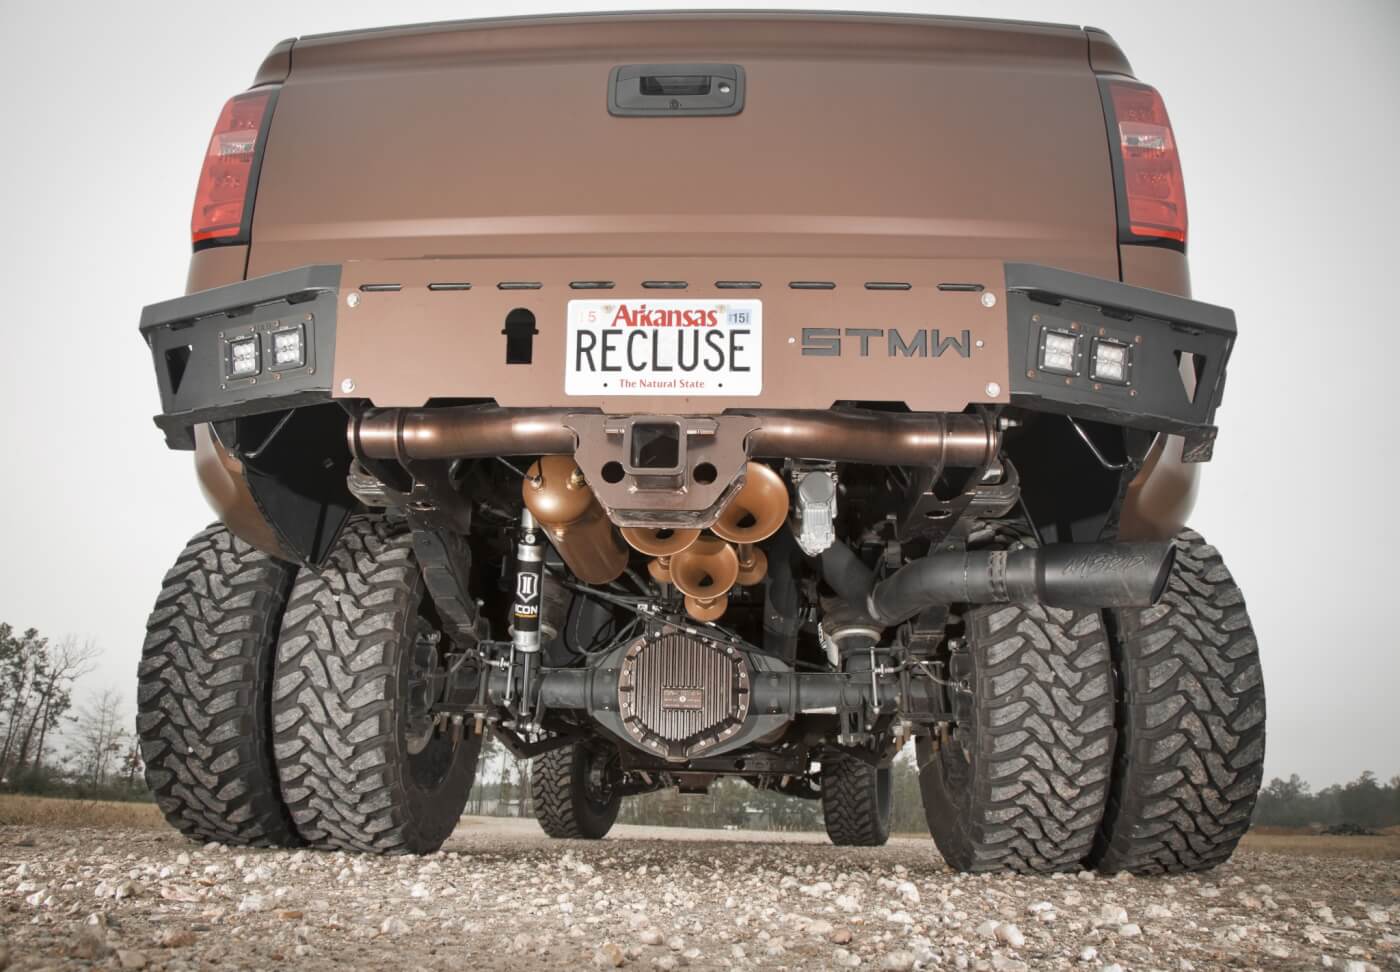 Under the rear of the truck, a set of 5-inch lift leaf springs from Atlas complements the McGaughys front suspension. As with the front, Icon Vehicle Dynamic¬¬ shocks are used. A set of Firestone air bags helps keep the truck level, even with a full load. To feed the air bags and HornBlasters air horns, a Viair compressor system was also installed. The final upgrade under the bumper is the Mag-Hytec differential cover. Regarding the bumper, it’s from ShowTime Metal Works. It works with the rear receiver hitch and sports two pairs of OLB LED lights on each corner.